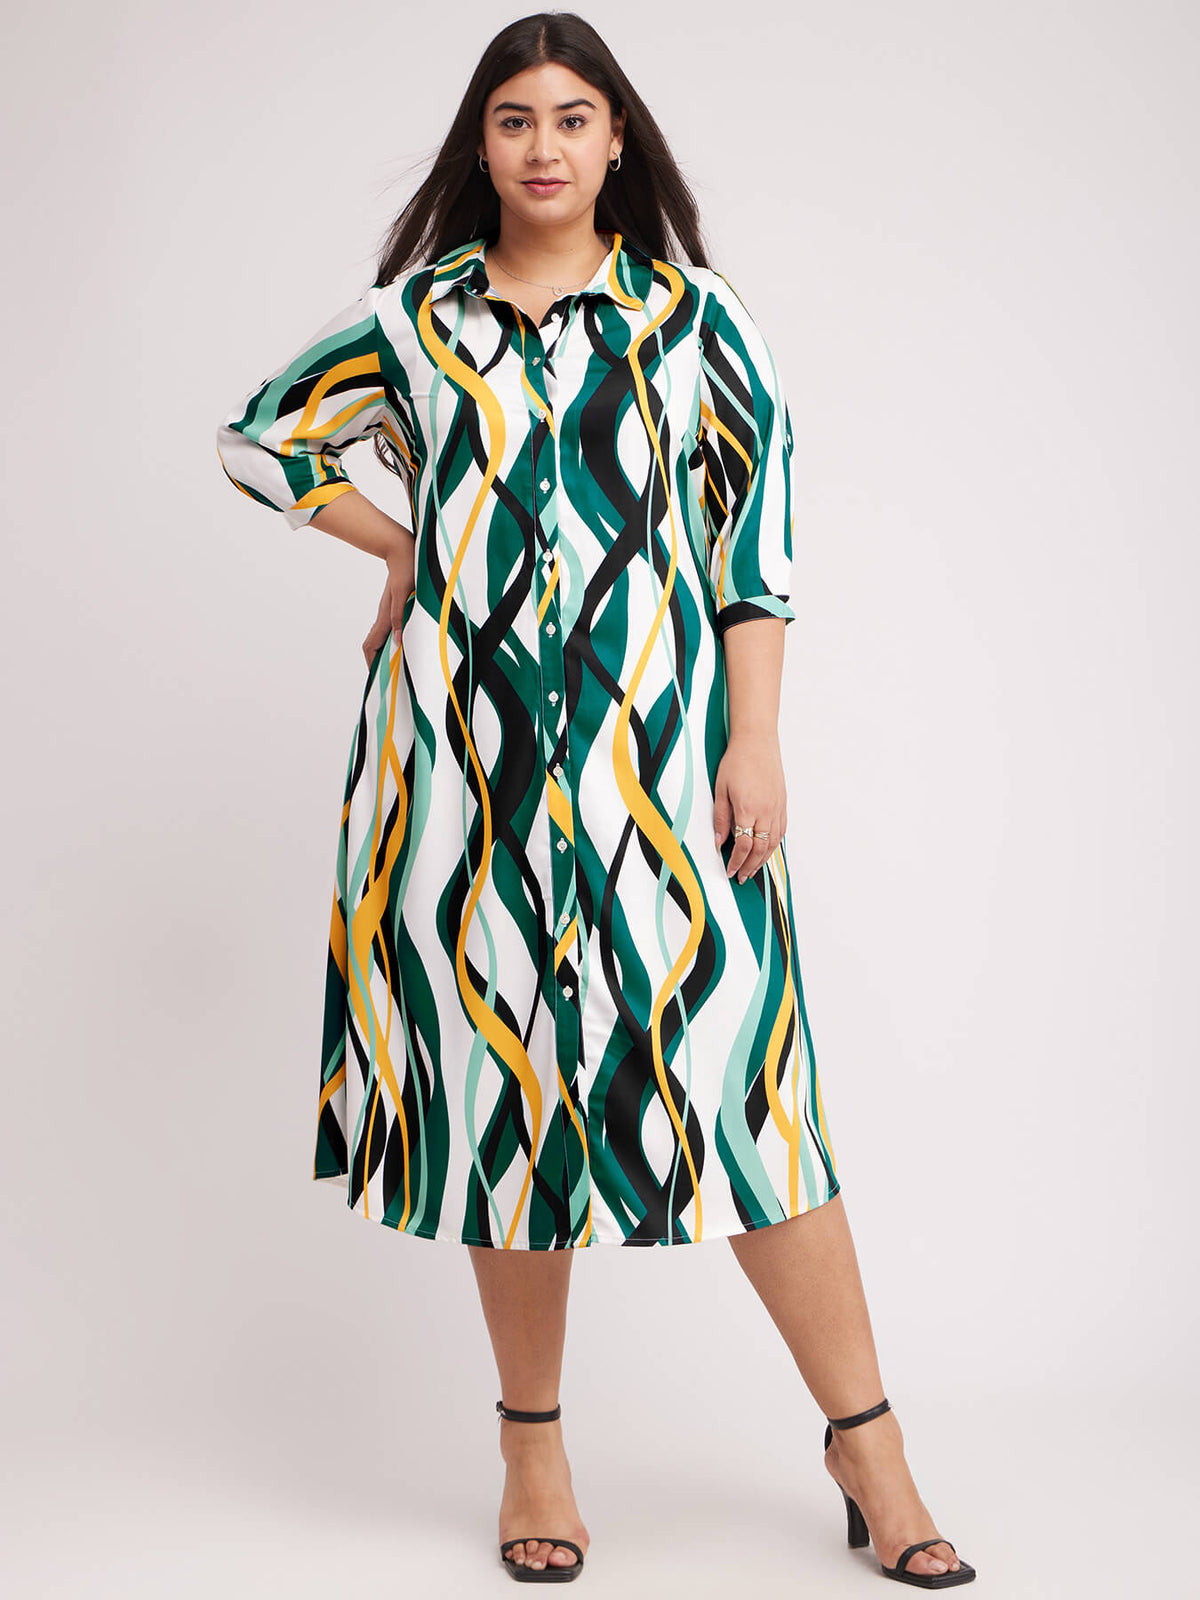 Abstract Print Shirt Dress - White And Teal